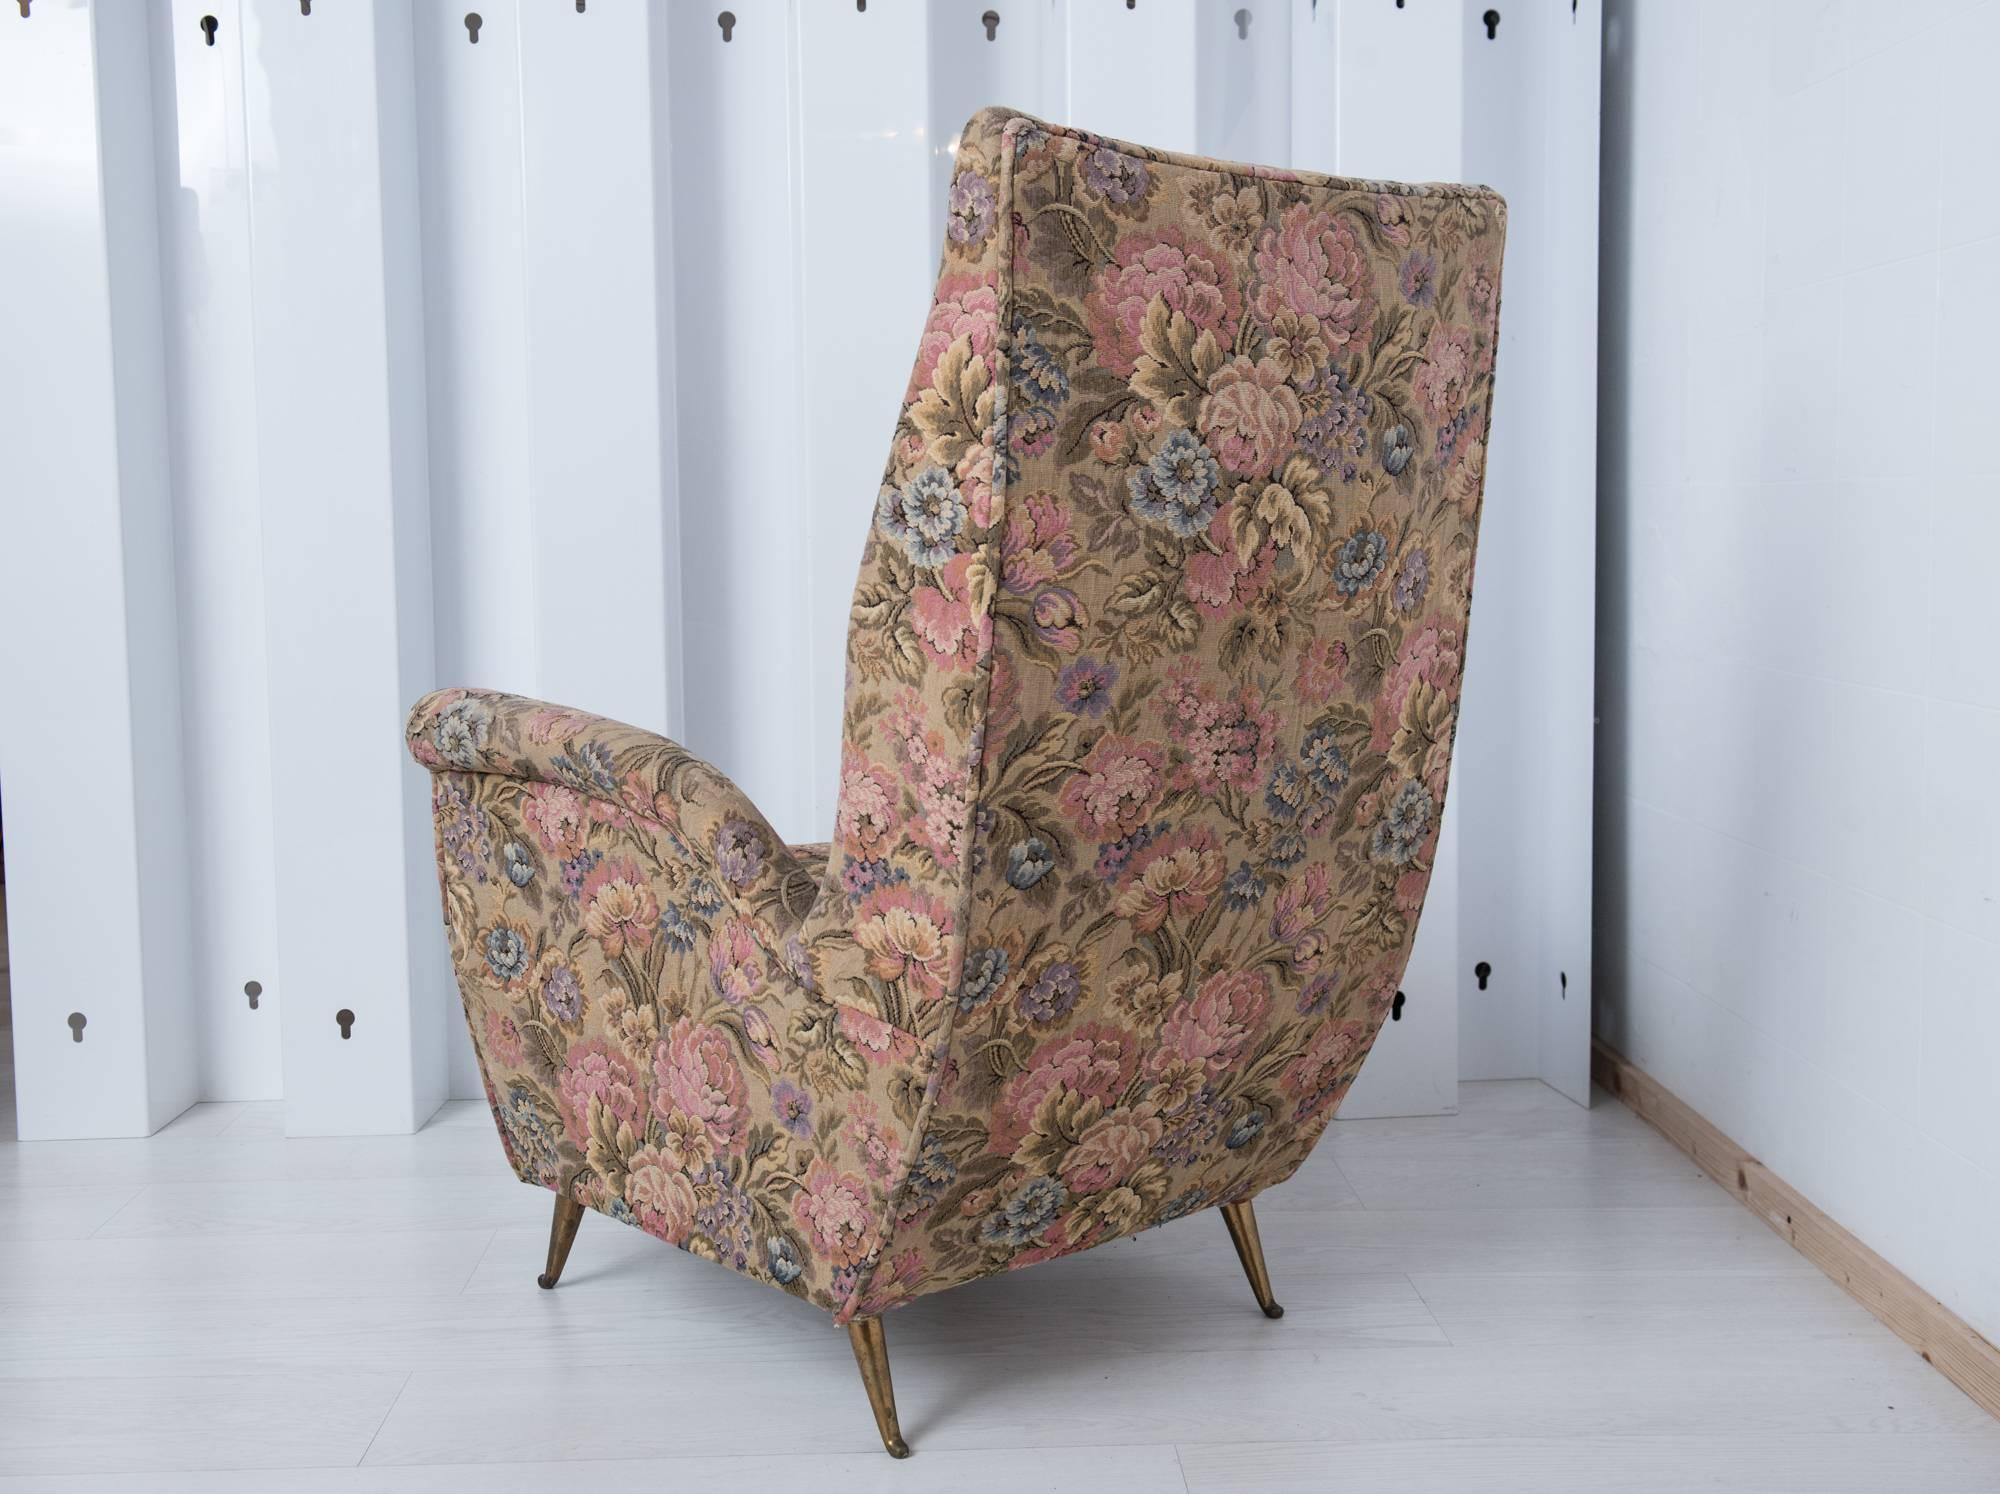 Italian Armchair Attributed to Gio Ponti Produced by ISA Bergamo in the 1950s For Sale